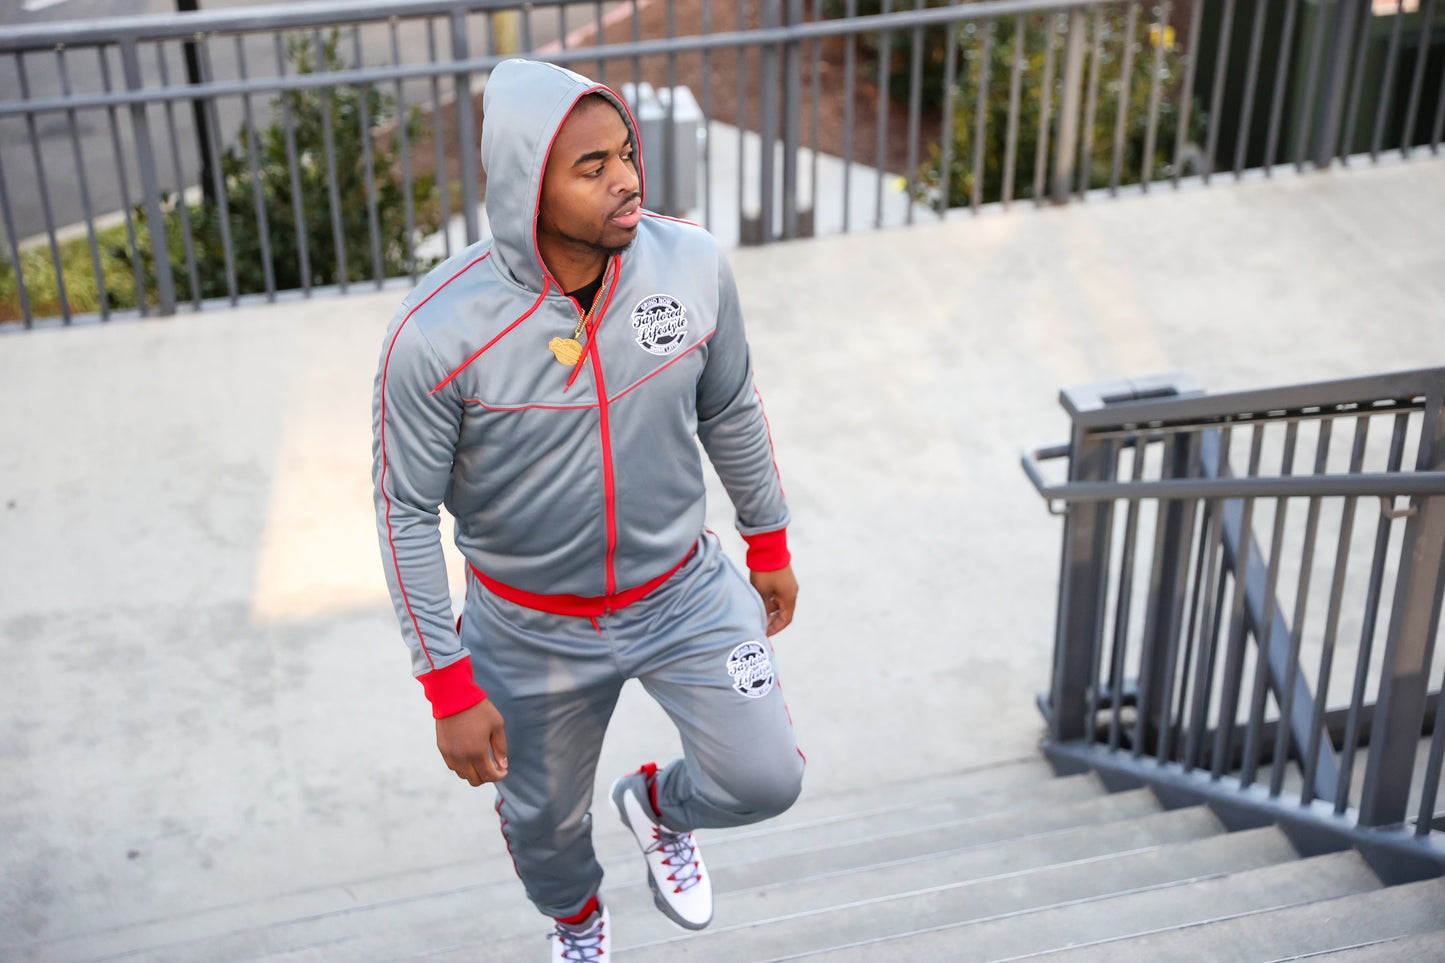 Taylored Gray and Red Sweatsuit